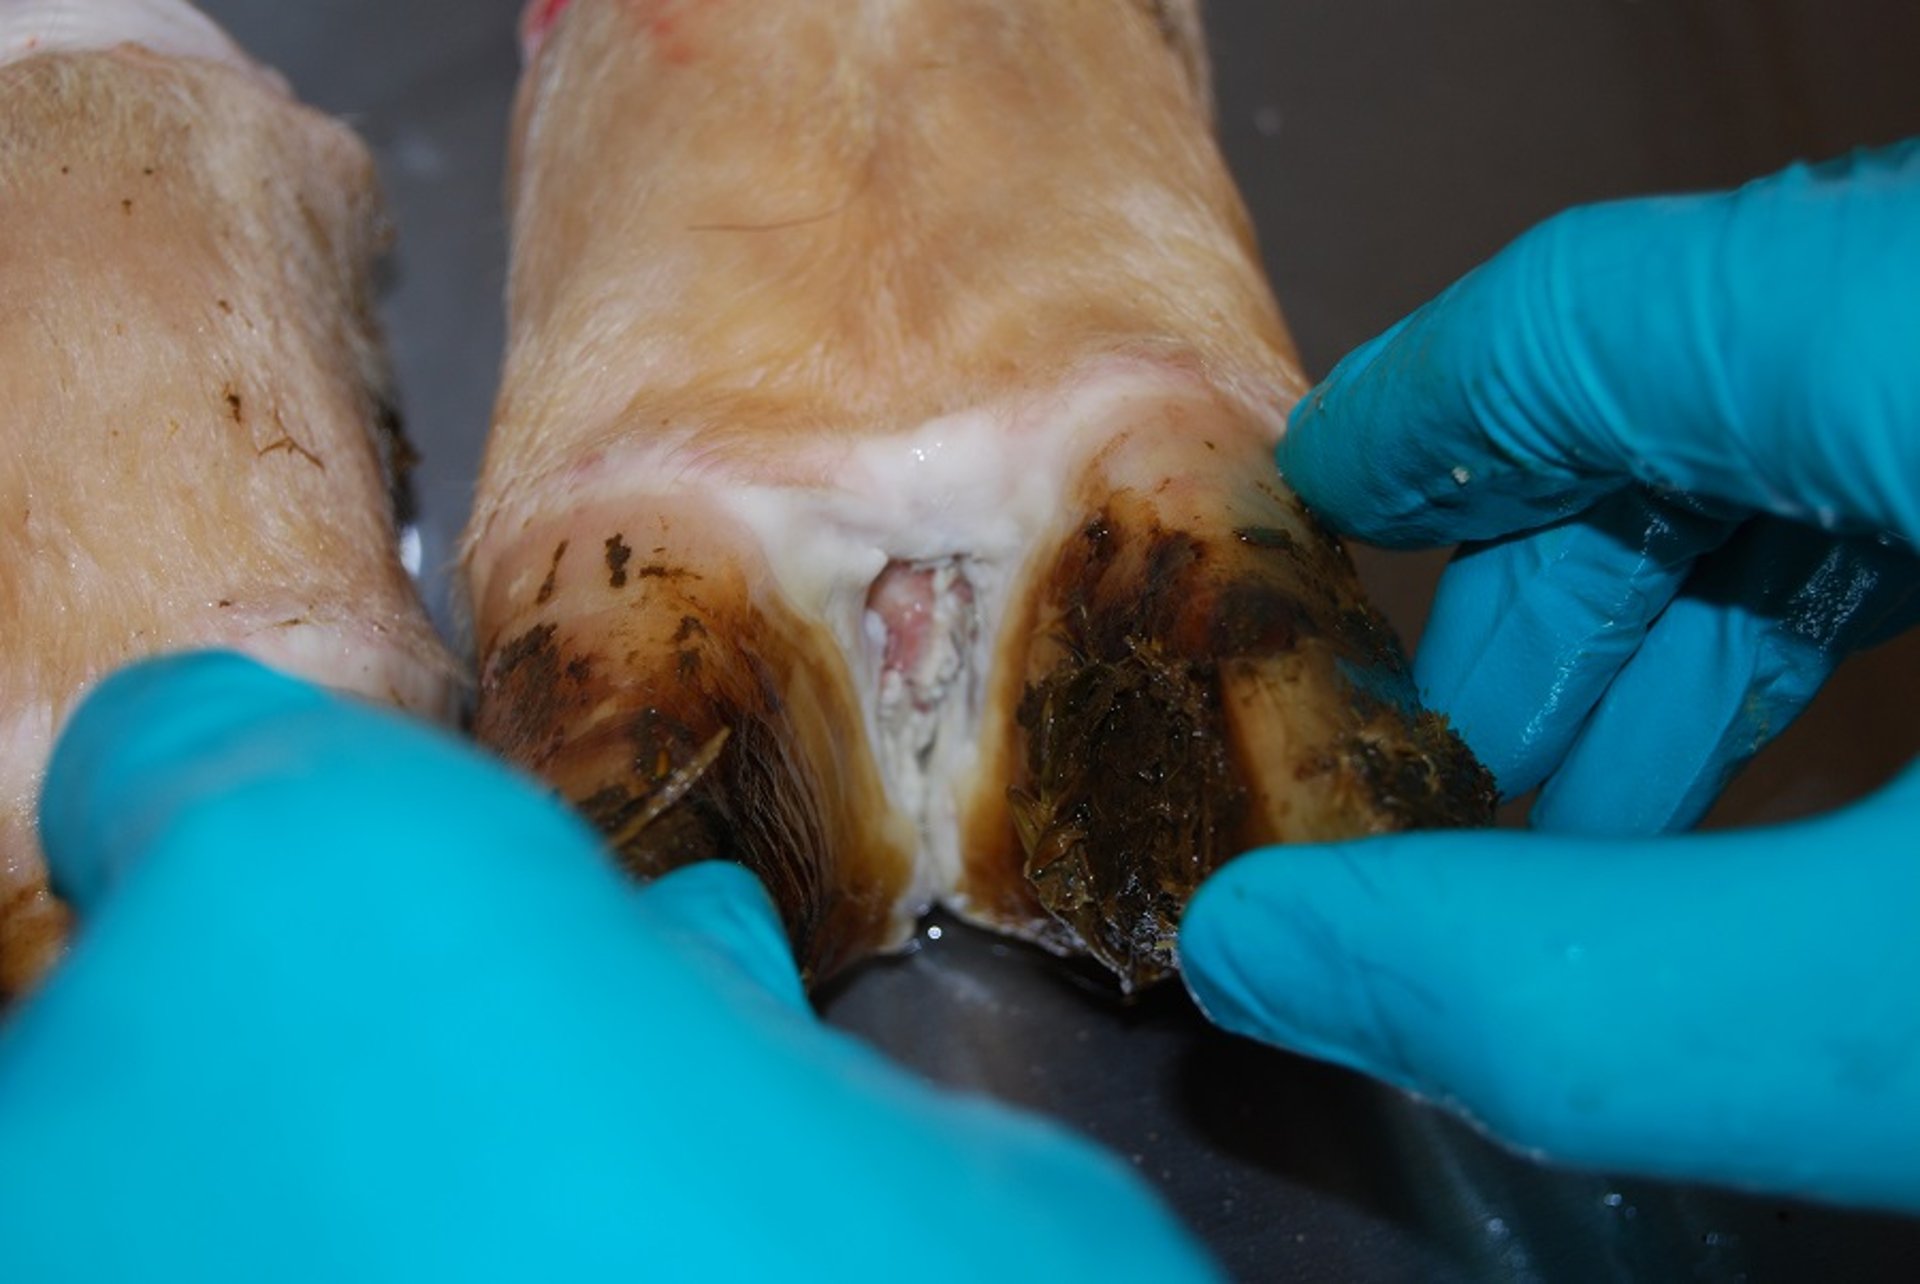 Foot lesion, cow